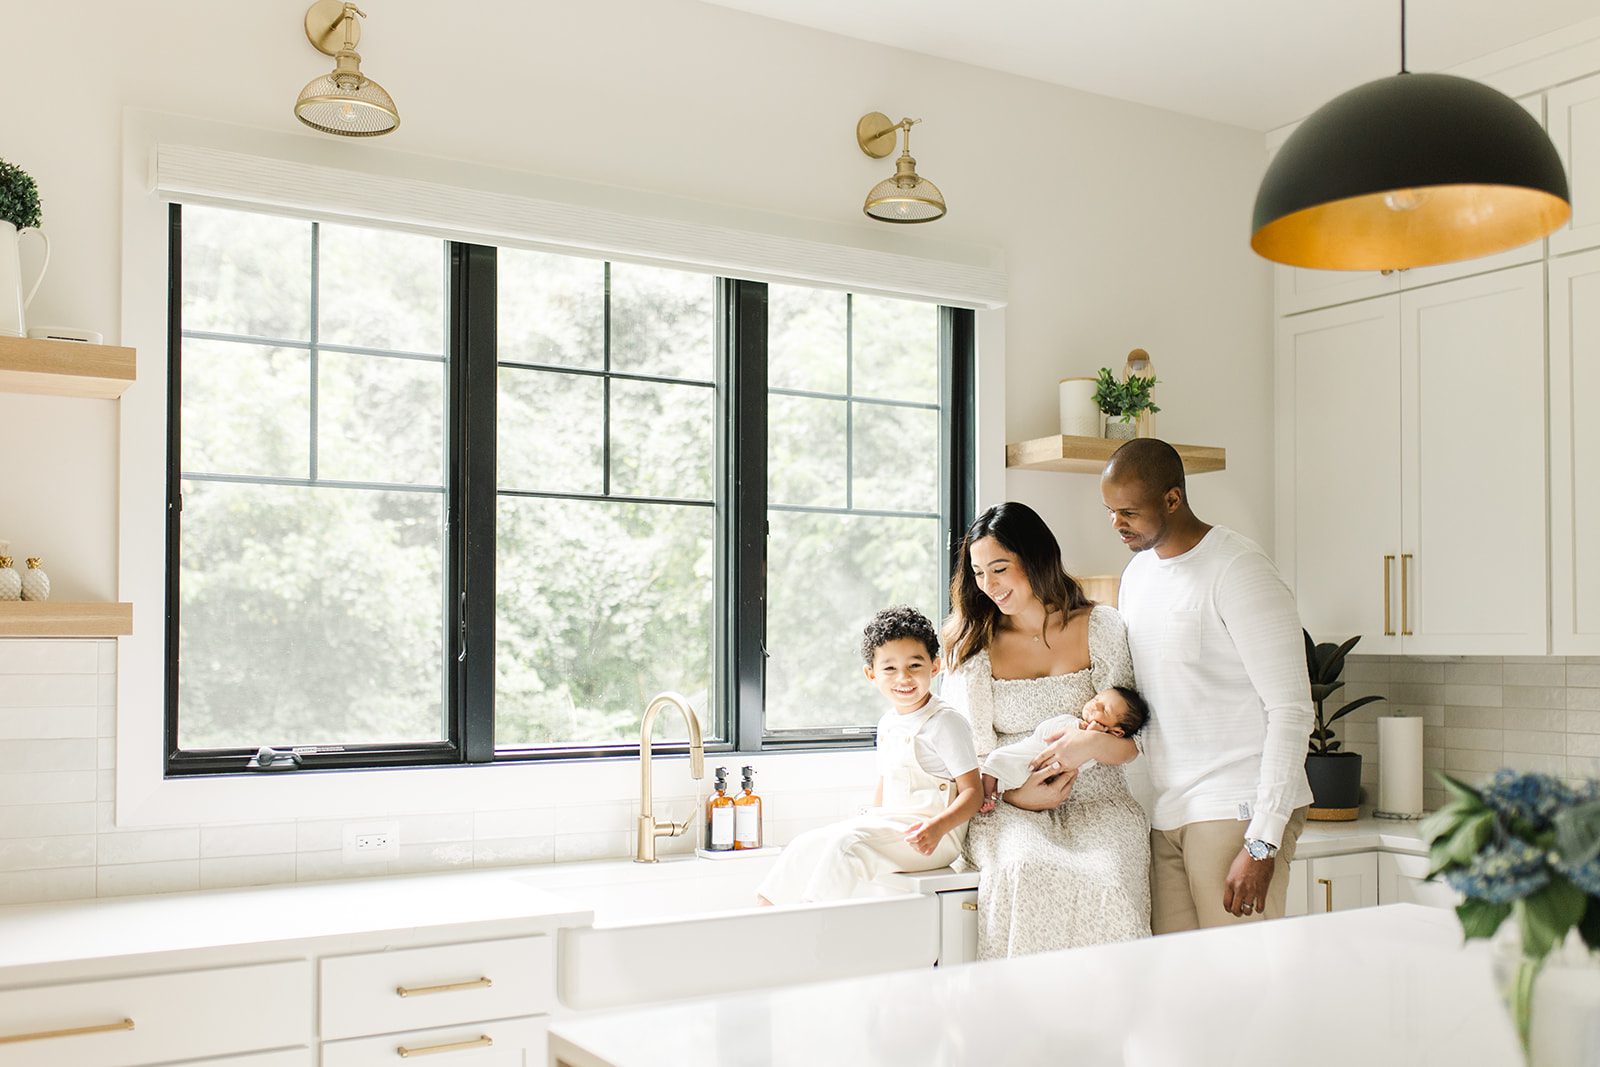 family together in the kitchen with toddler playing in the sink